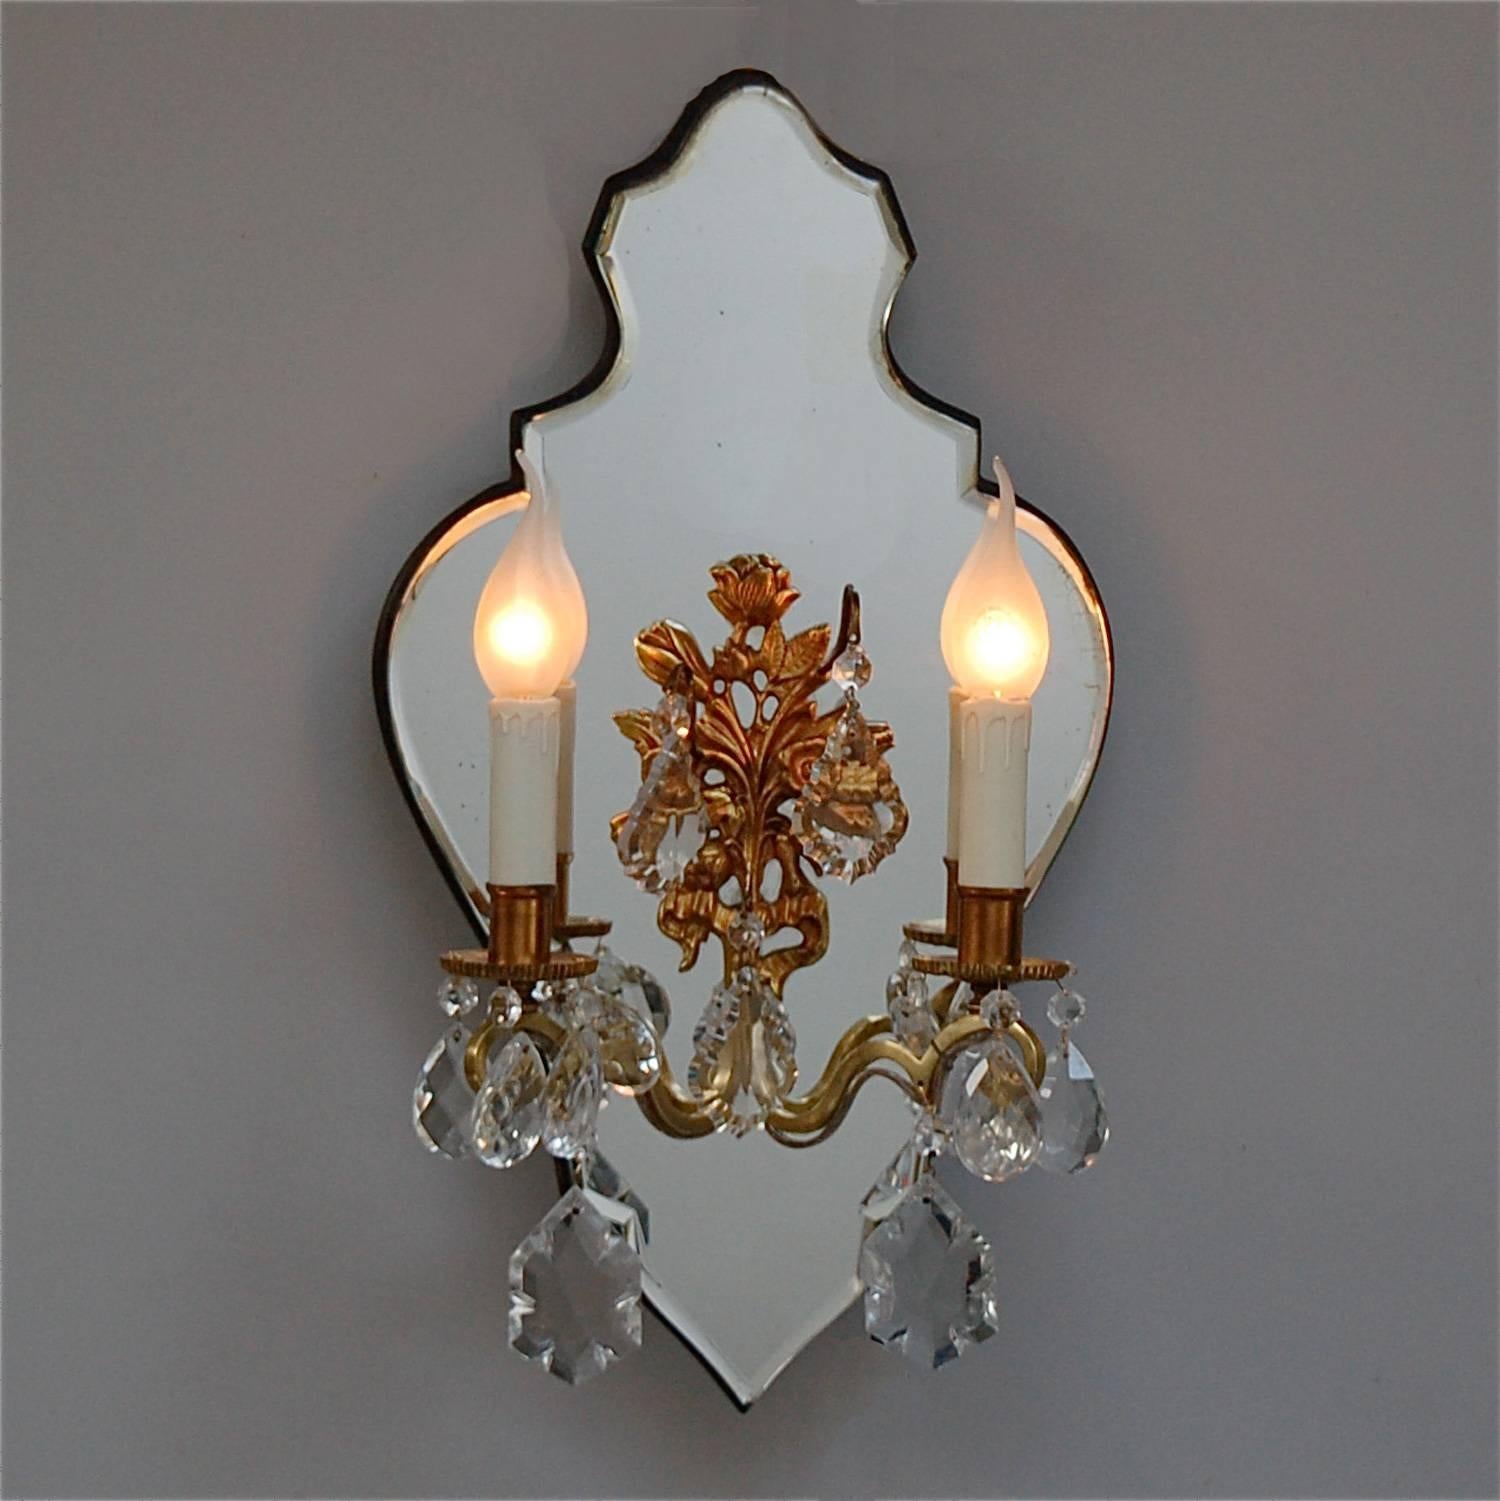 A two-arm candle wall sconce decorated with crystal droplets and mounted on shapely mirror backplate. The centre has a gold colored floral decoration with three hooks from which large crystals are suspended. The mirror has beveled edges and a lovely